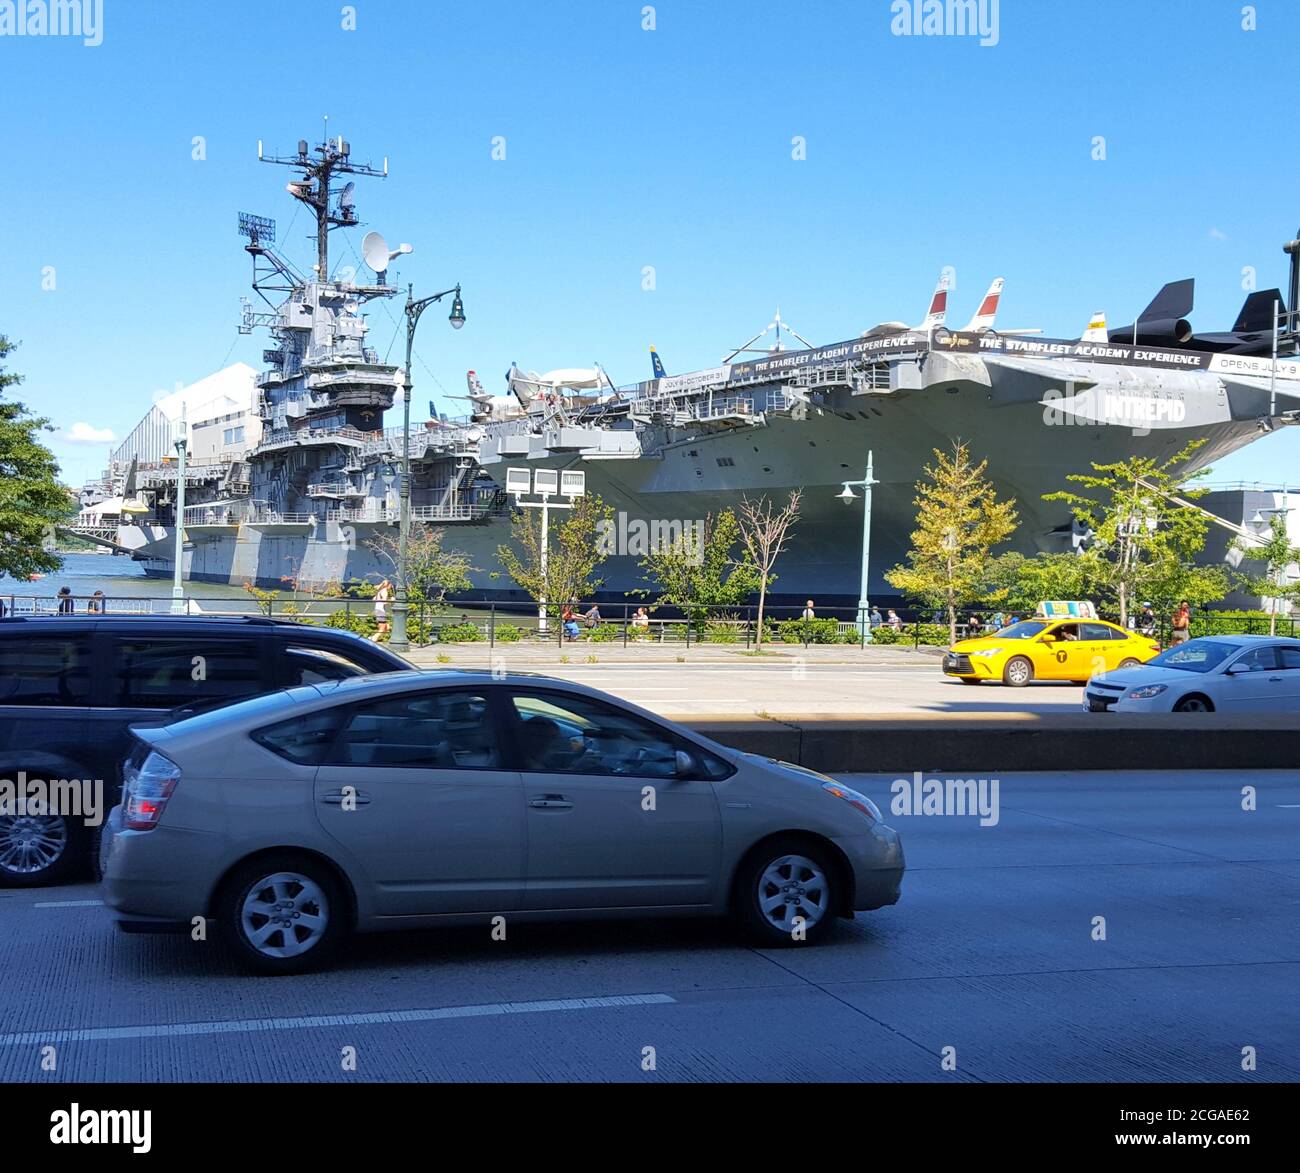 Cars driving by the Intrepid Sea, Air & Space Museum, New York City, United States Stock Photo